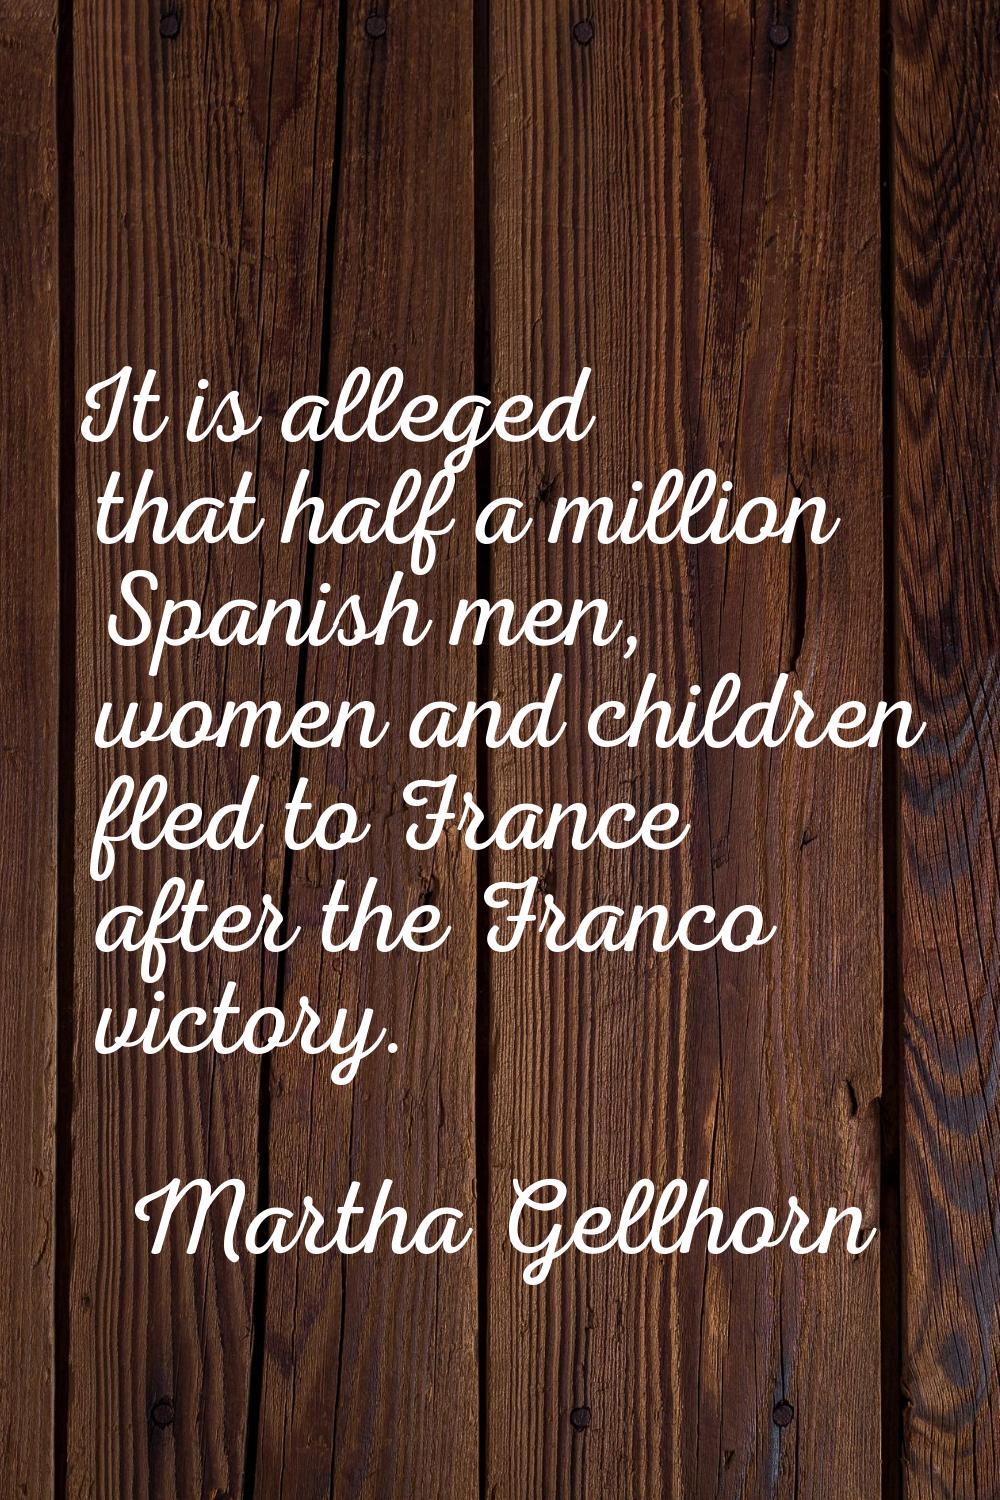 It is alleged that half a million Spanish men, women and children fled to France after the Franco v